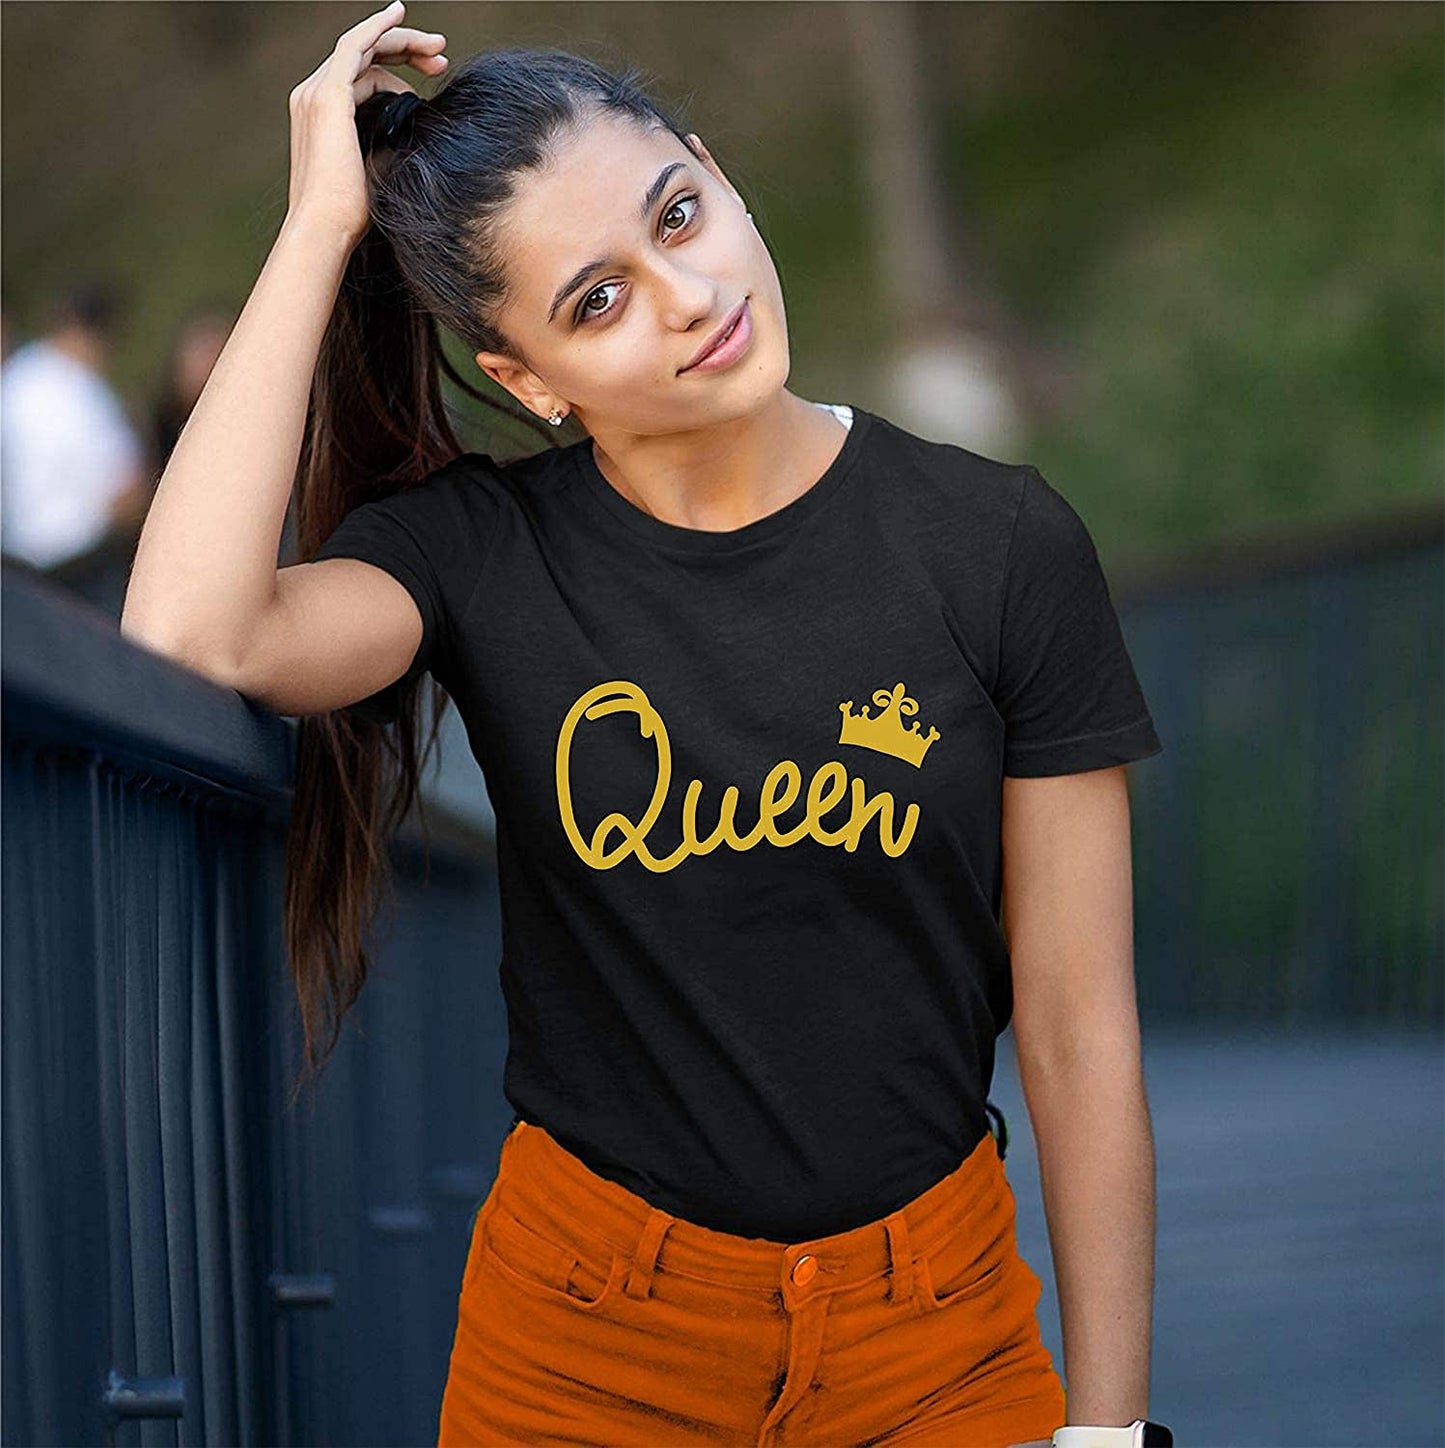 King Queen 2 matching Couple T shirts- Black